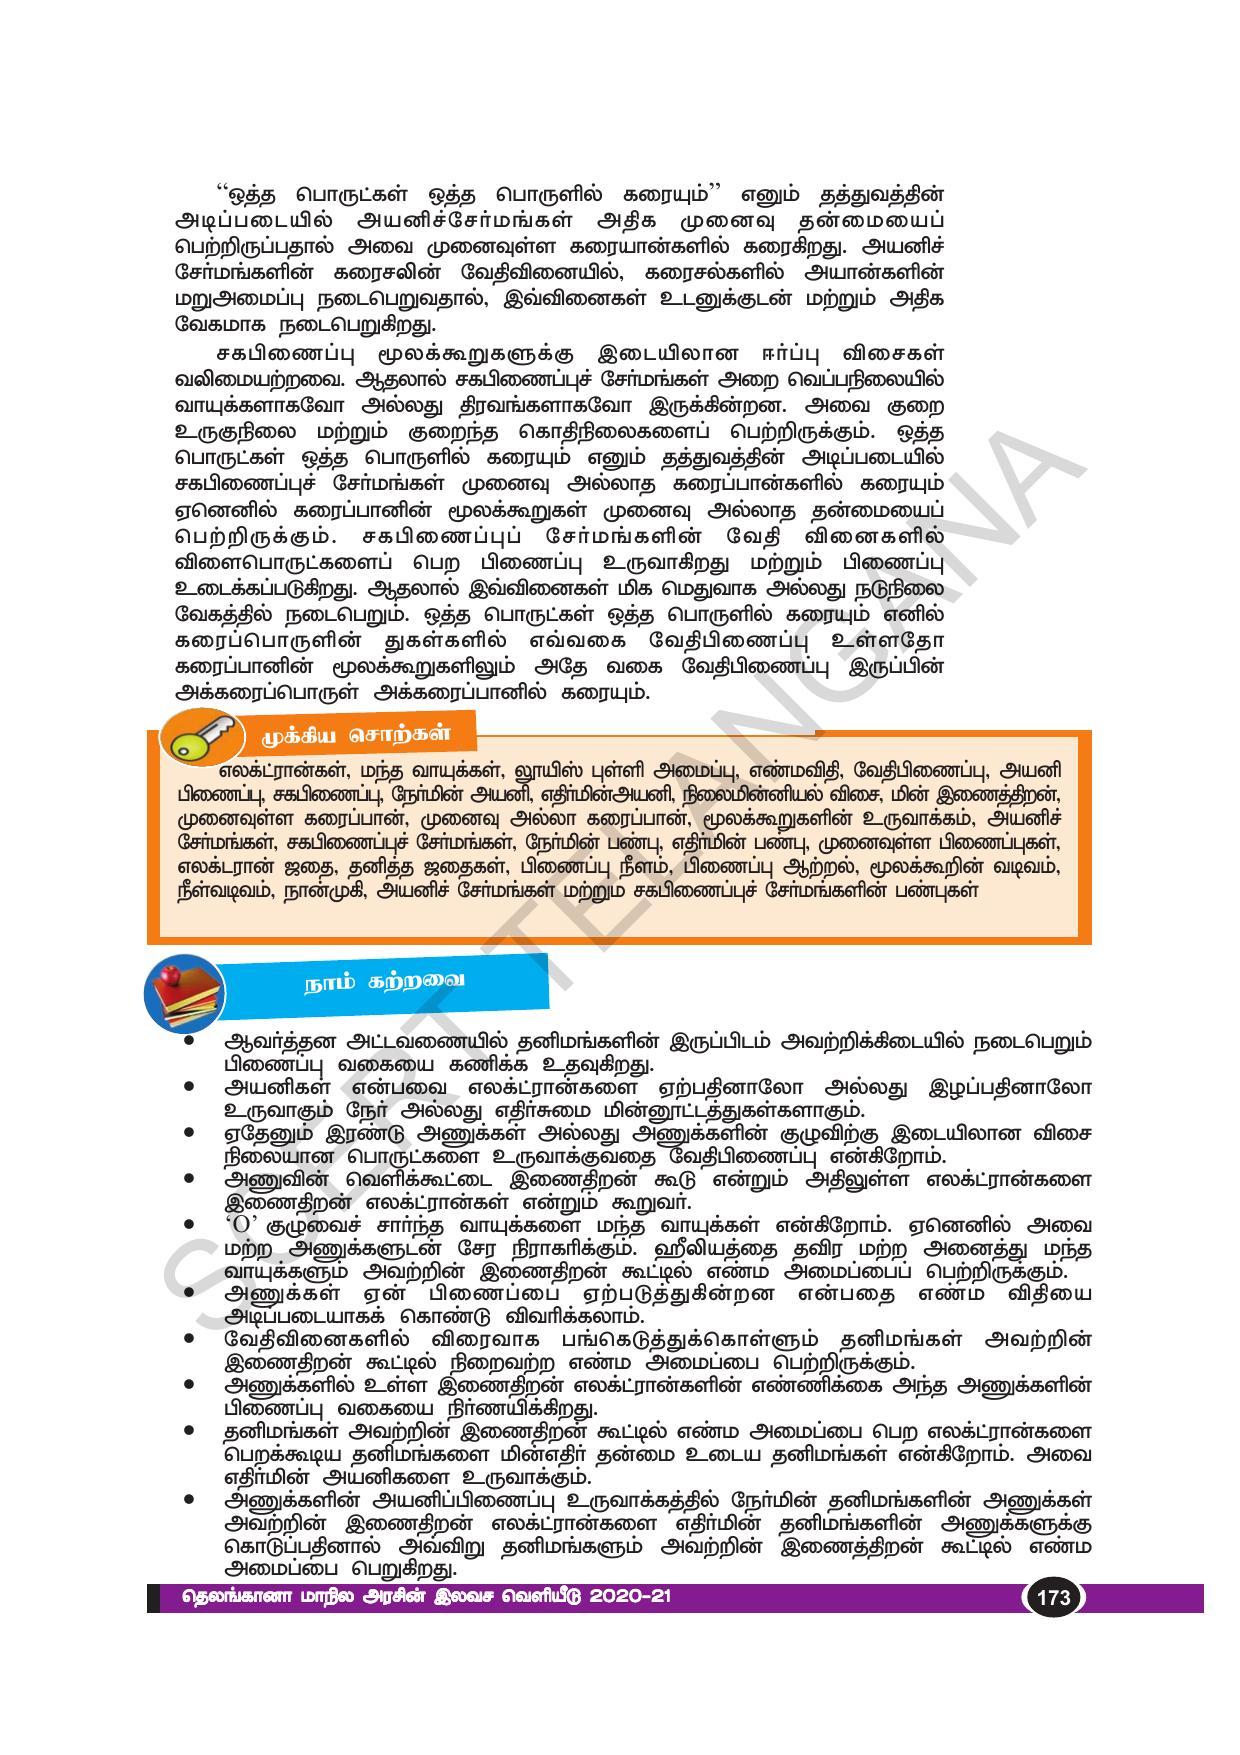 TS SCERT Class 10 Physical Science(Tamil Medium) Text Book - Page 185